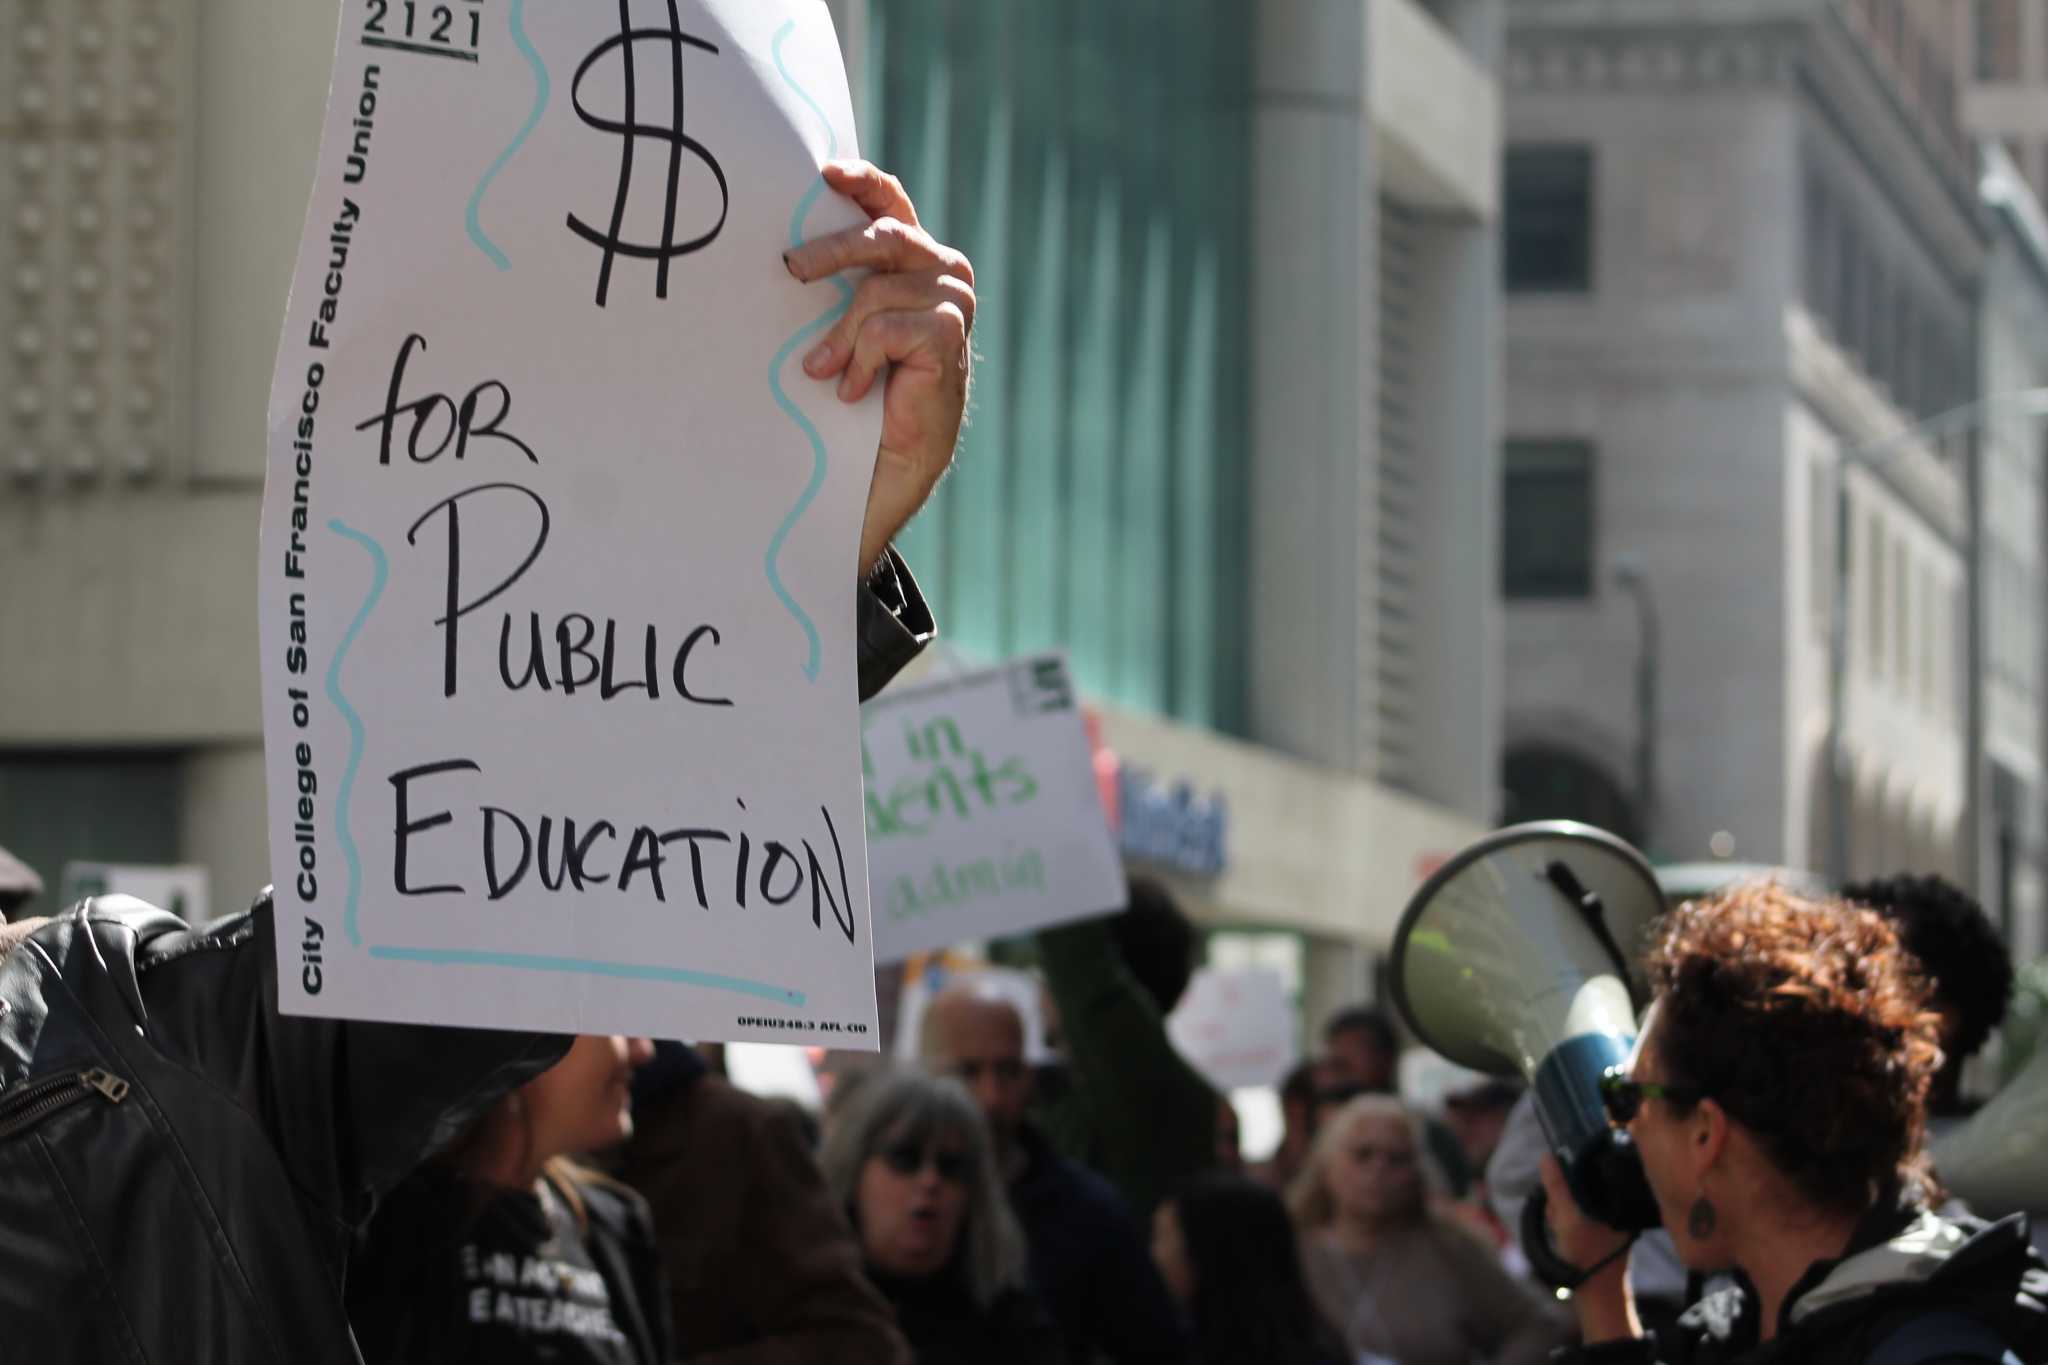 IMG_6684: A protestor holds a sign supporting money for public education as City College faculty, students, and community members march around him on March 11, 2016 in San Francisco, Calif. (Audrey Garces/The Guardsman)